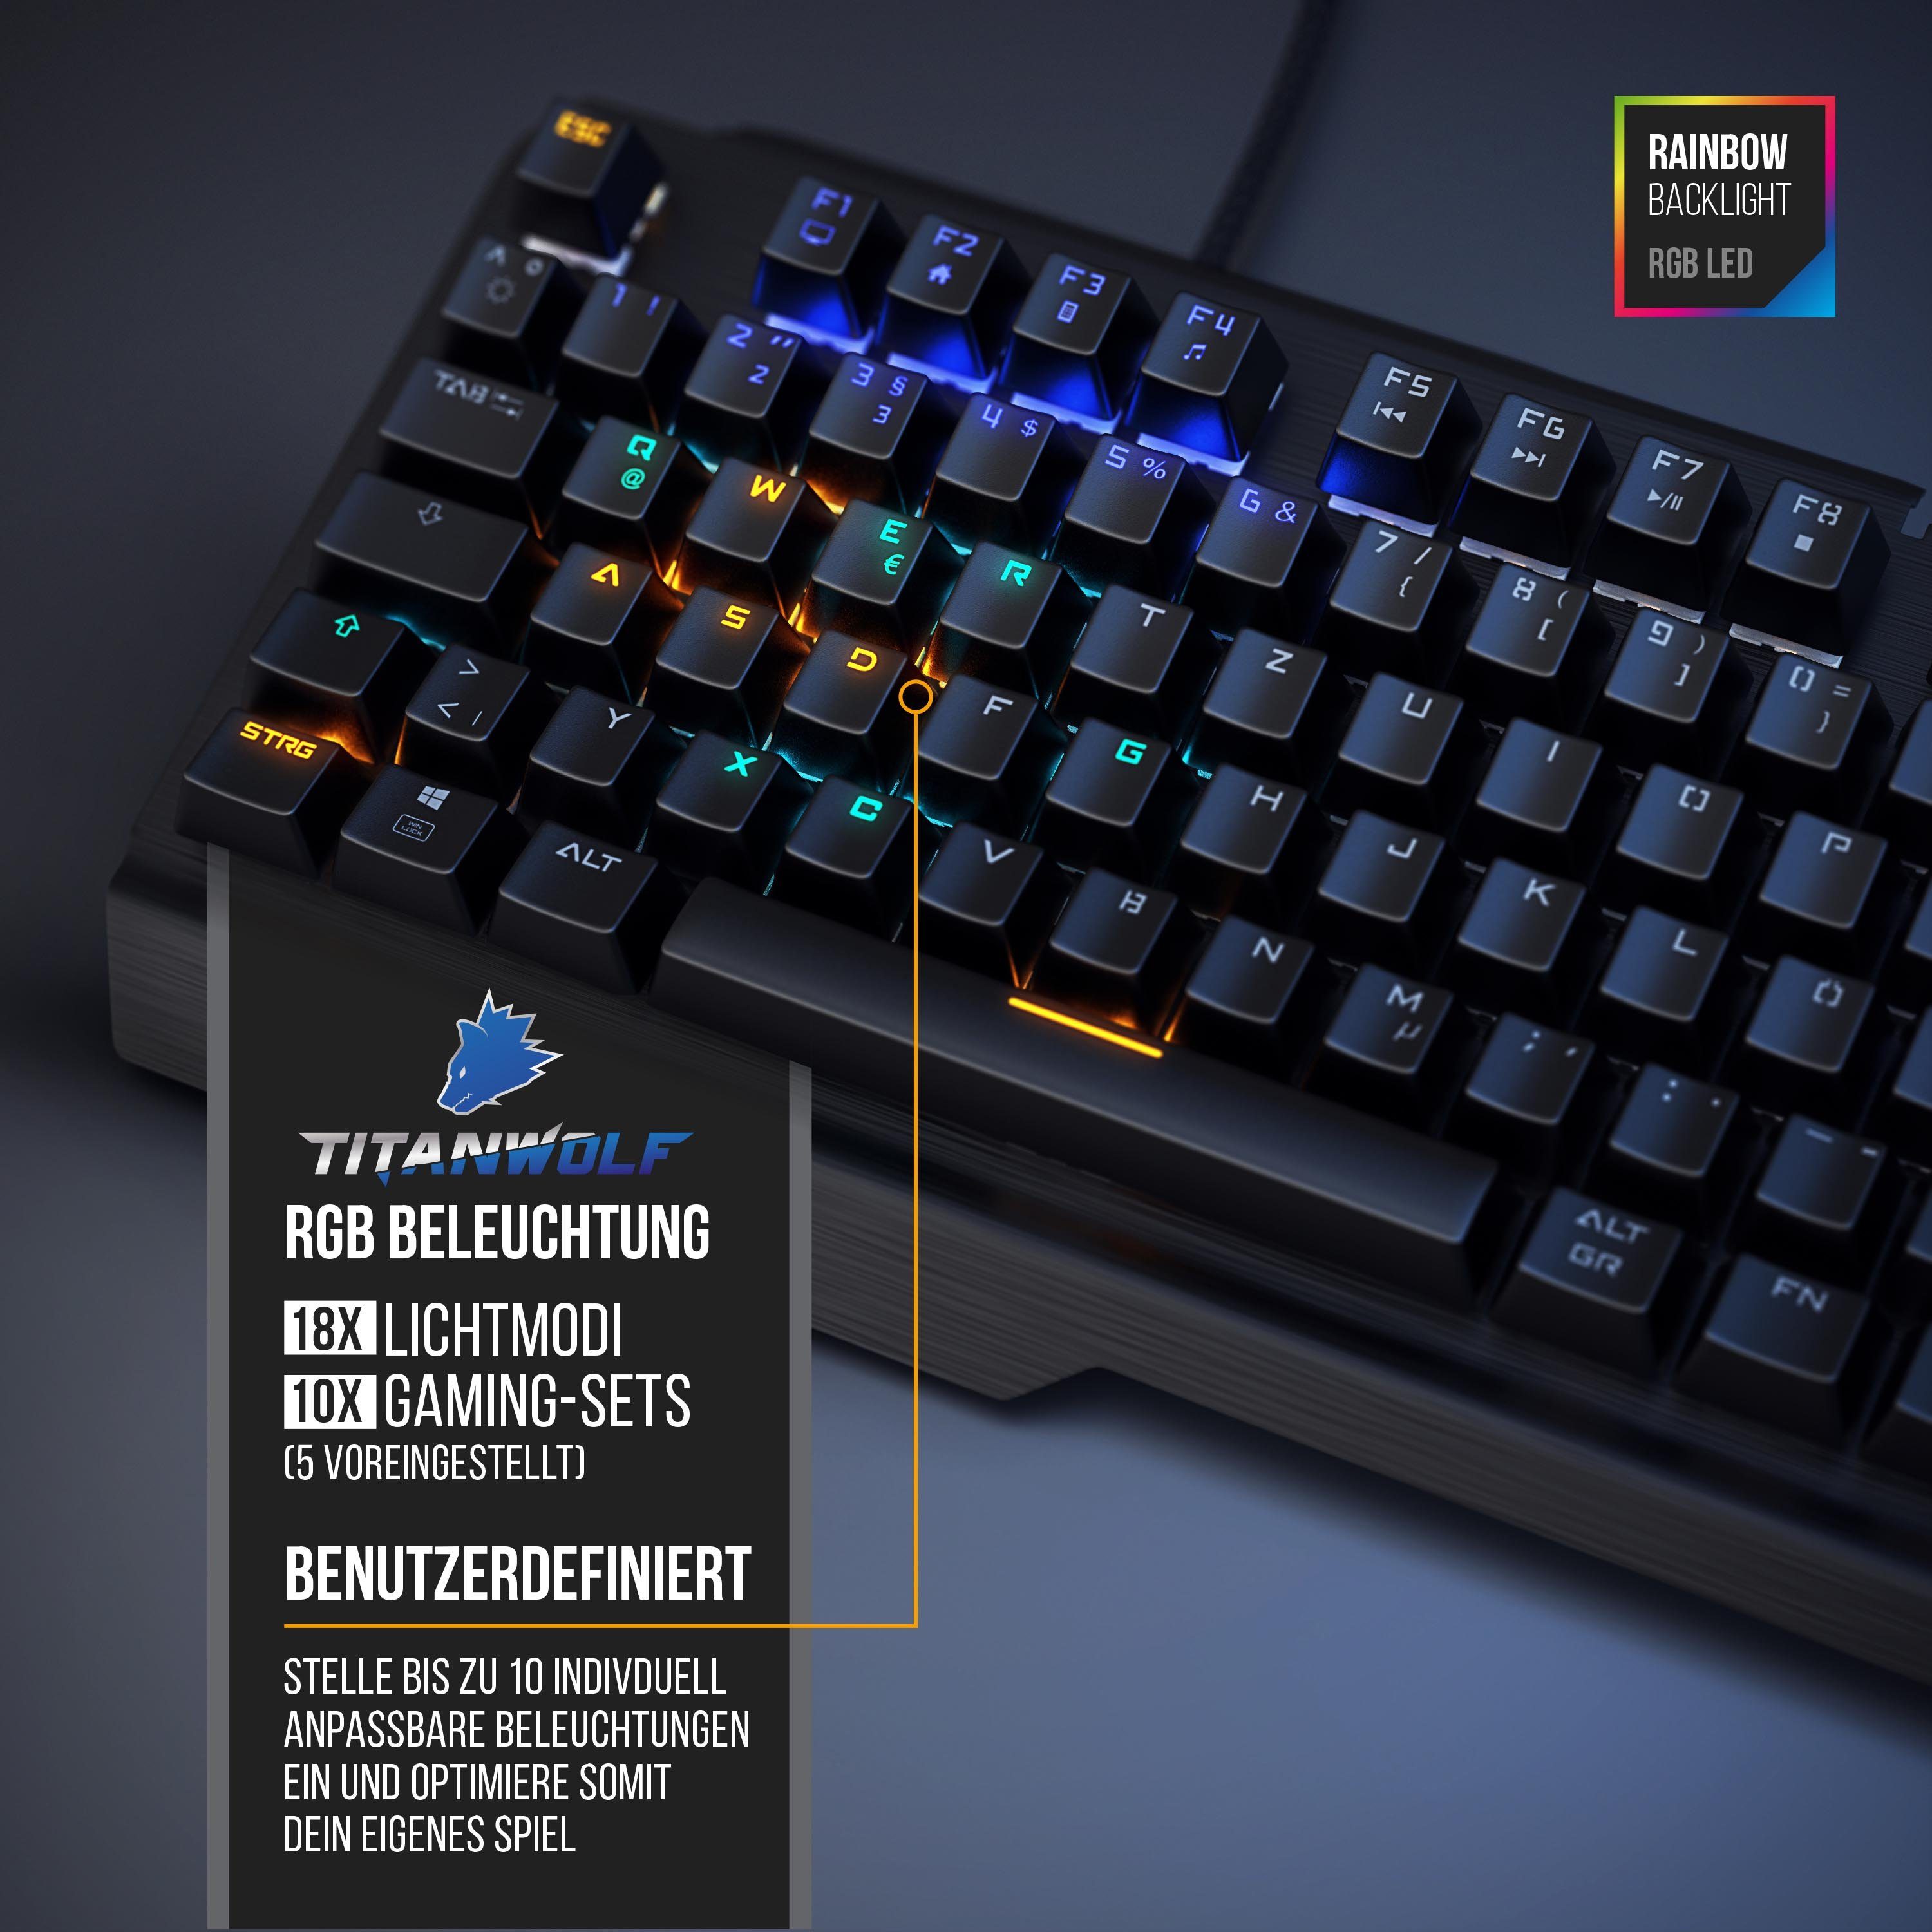 Kailh Blue, LED-Beleuchtung) Gaming-Tastatur Keyboard, Anti-Ghosting, Titanwolf (mechanisches